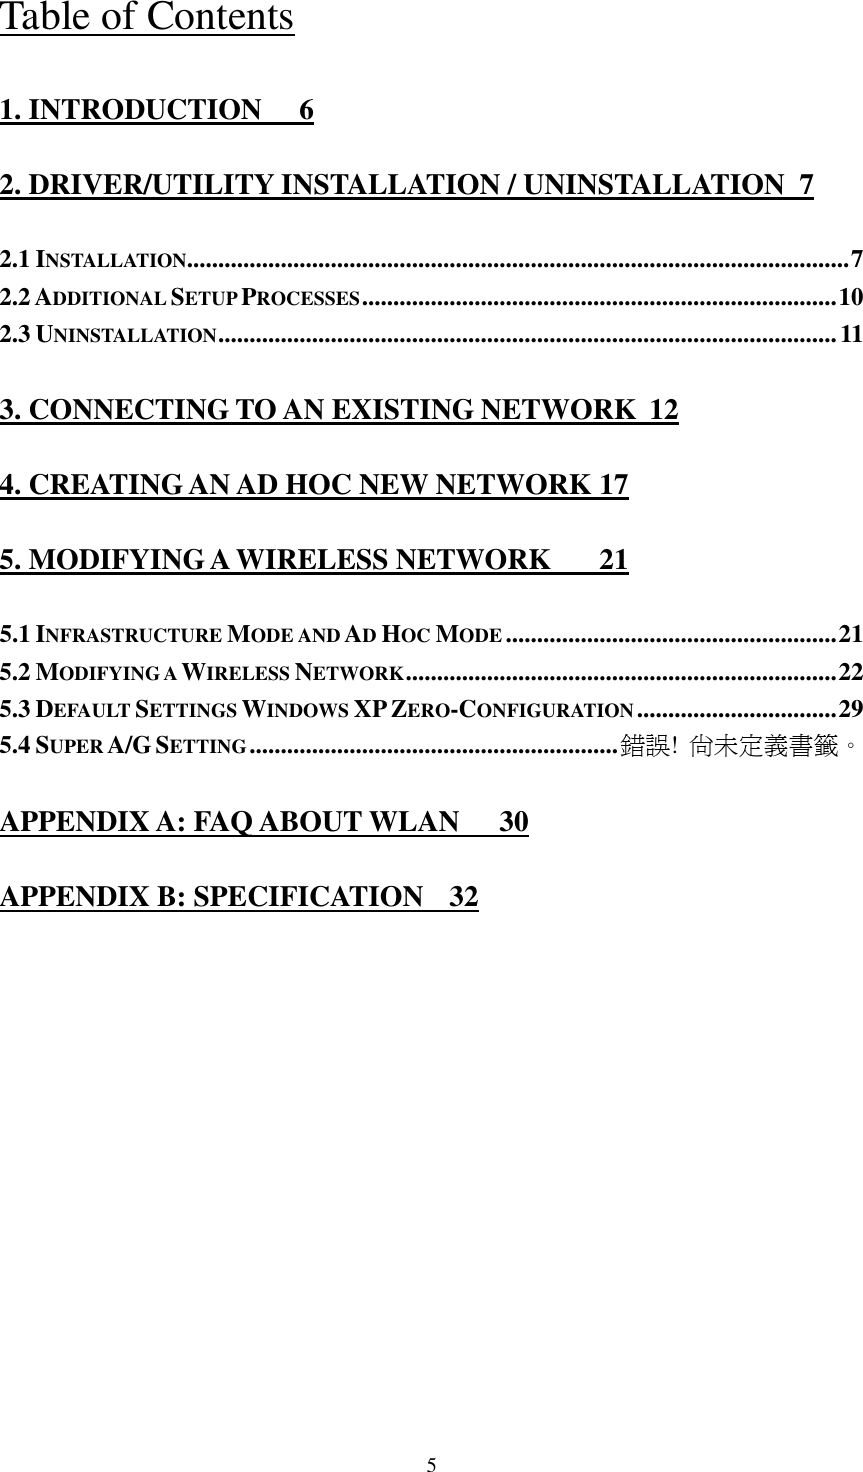   5 Table of Contents 1. INTRODUCTION  6 2. DRIVER/UTILITY INSTALLATION / UNINSTALLATION  7 2.1 INSTALLATION..........................................................................................................7 2.2 ADDITIONAL SETUP PROCESSES............................................................................10 2.3 UNINSTALLATION...................................................................................................11 3. CONNECTING TO AN EXISTING NETWORK  12 4. CREATING AN AD HOC NEW NETWORK 17 5. MODIFYING A WIRELESS NETWORK  21 5.1 INFRASTRUCTURE MODE AND AD HOC MODE.....................................................21 5.2 MODIFYING A WIRELESS NETWORK.....................................................................22 5.3 DEFAULT SETTINGS WINDOWS XP ZERO-CONFIGURATION................................29 5.4 SUPER A/G SETTING...........................................................錯誤! 尚未定義書籤。 APPENDIX A: FAQ ABOUT WLAN  30 APPENDIX B: SPECIFICATION  32 